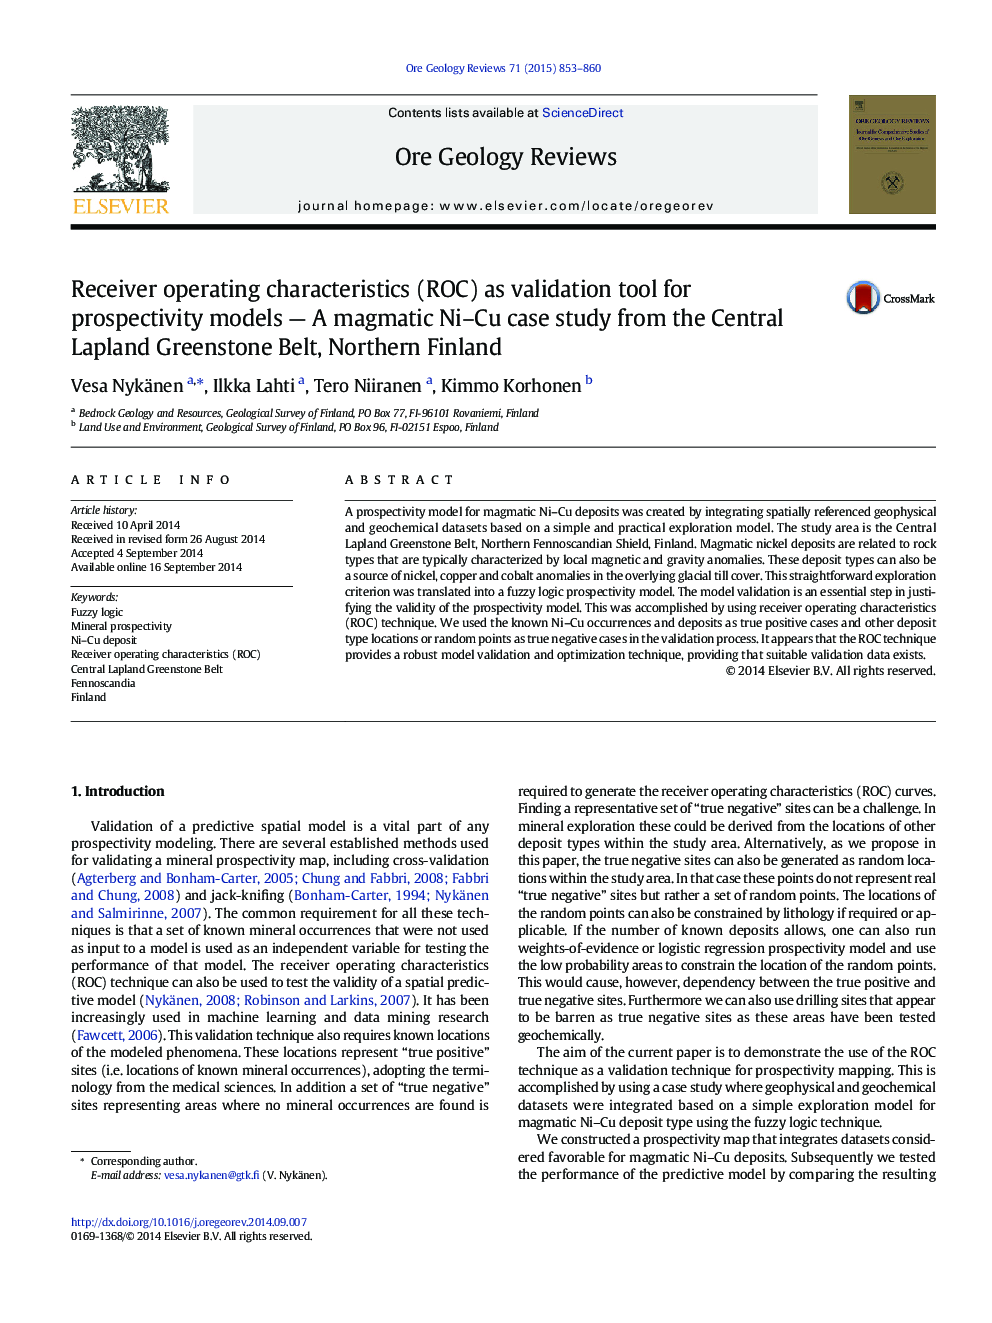 Receiver operating characteristics (ROC) as validation tool for prospectivity models — A magmatic Ni–Cu case study from the Central Lapland Greenstone Belt, Northern Finland